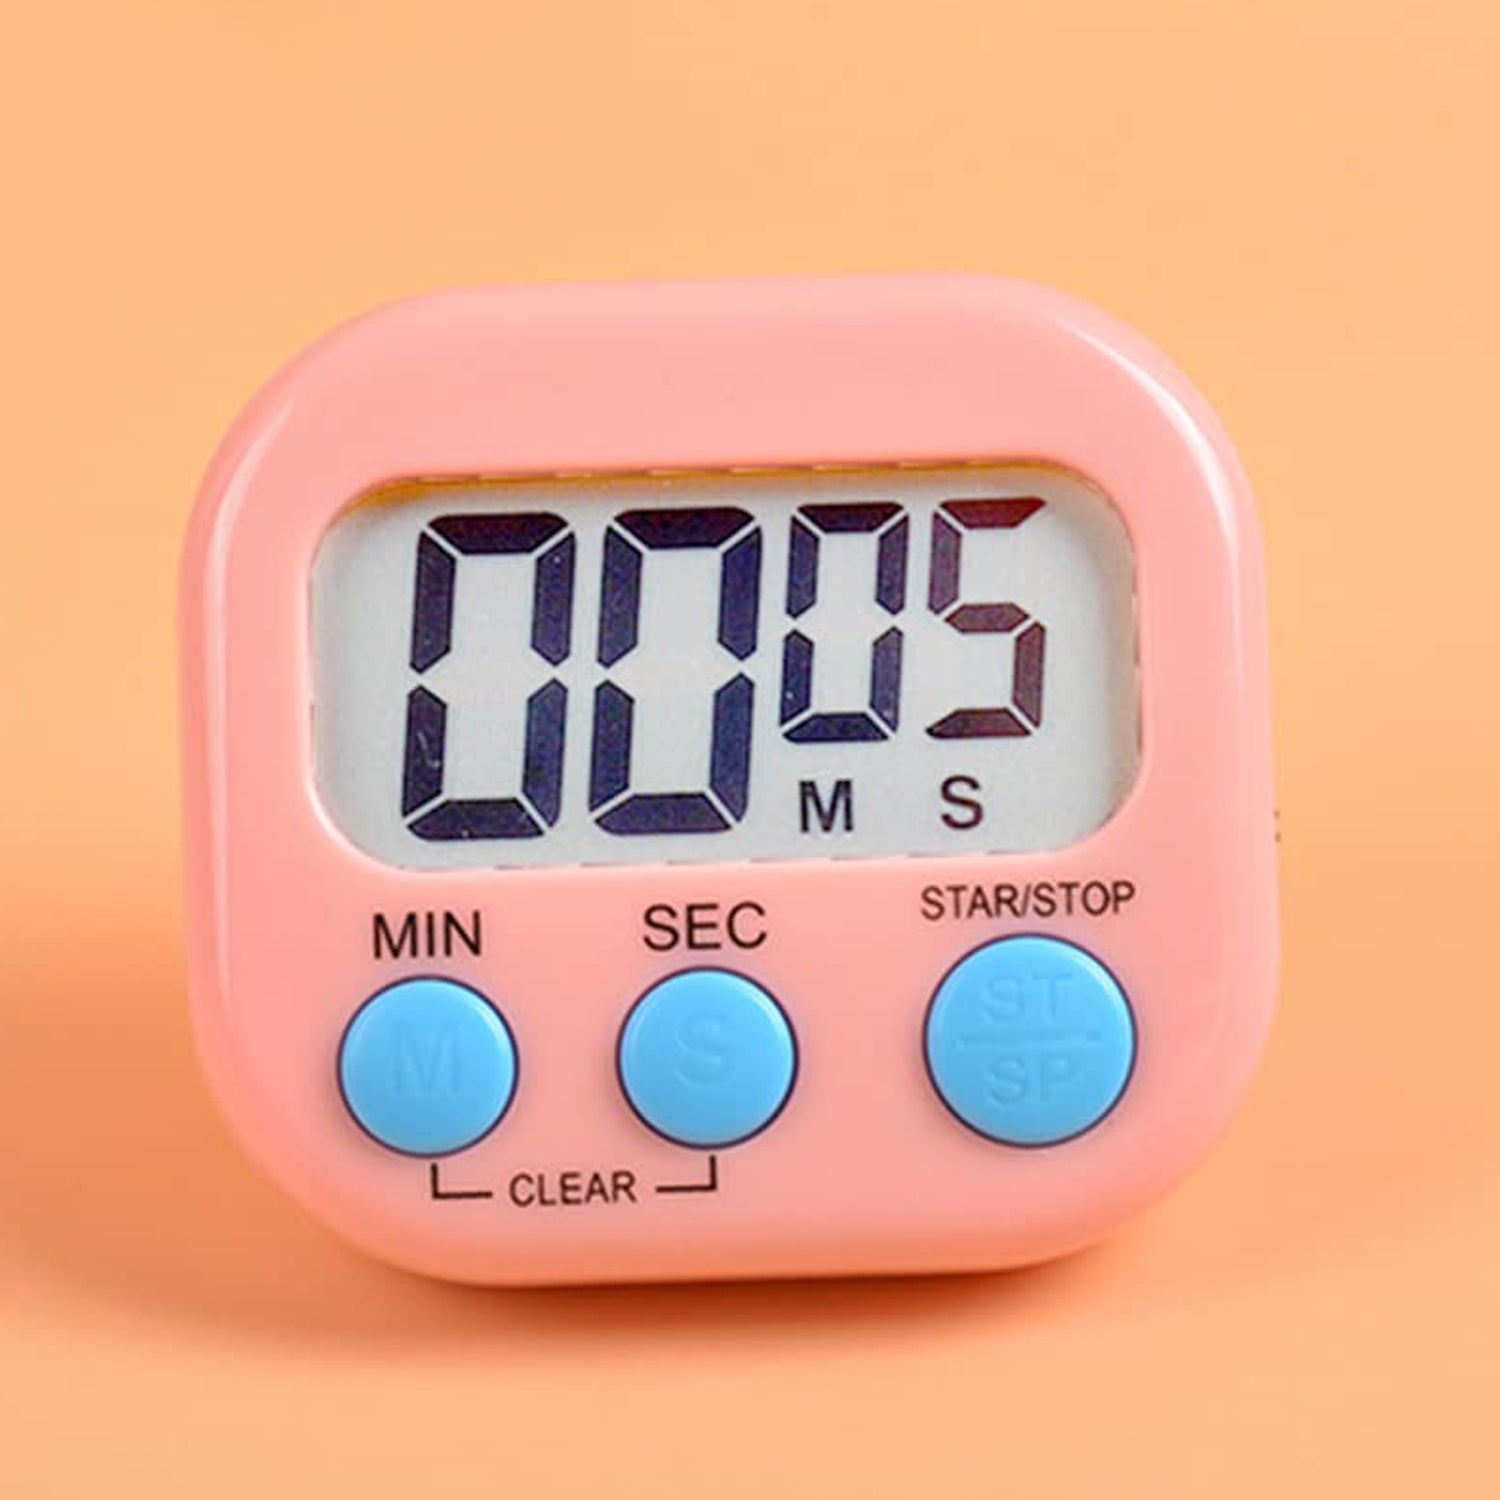 1540 Digital Kitchen Timer Clear Big Digits 0-99 Min for Cooking Office Clock